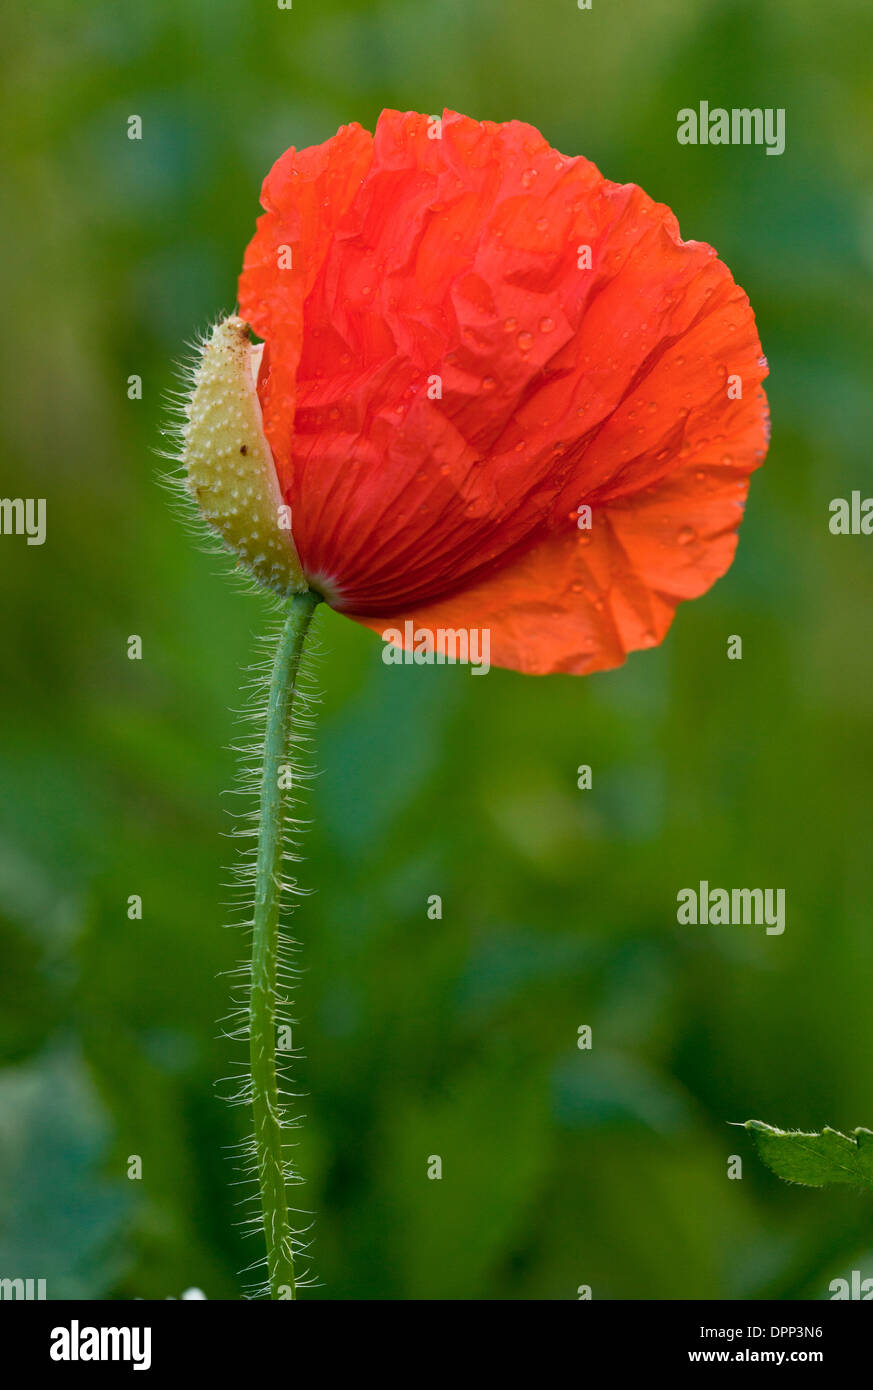 Common Poppy, Papaver rhoeas with buds opening and sepals falling. Stock Photo